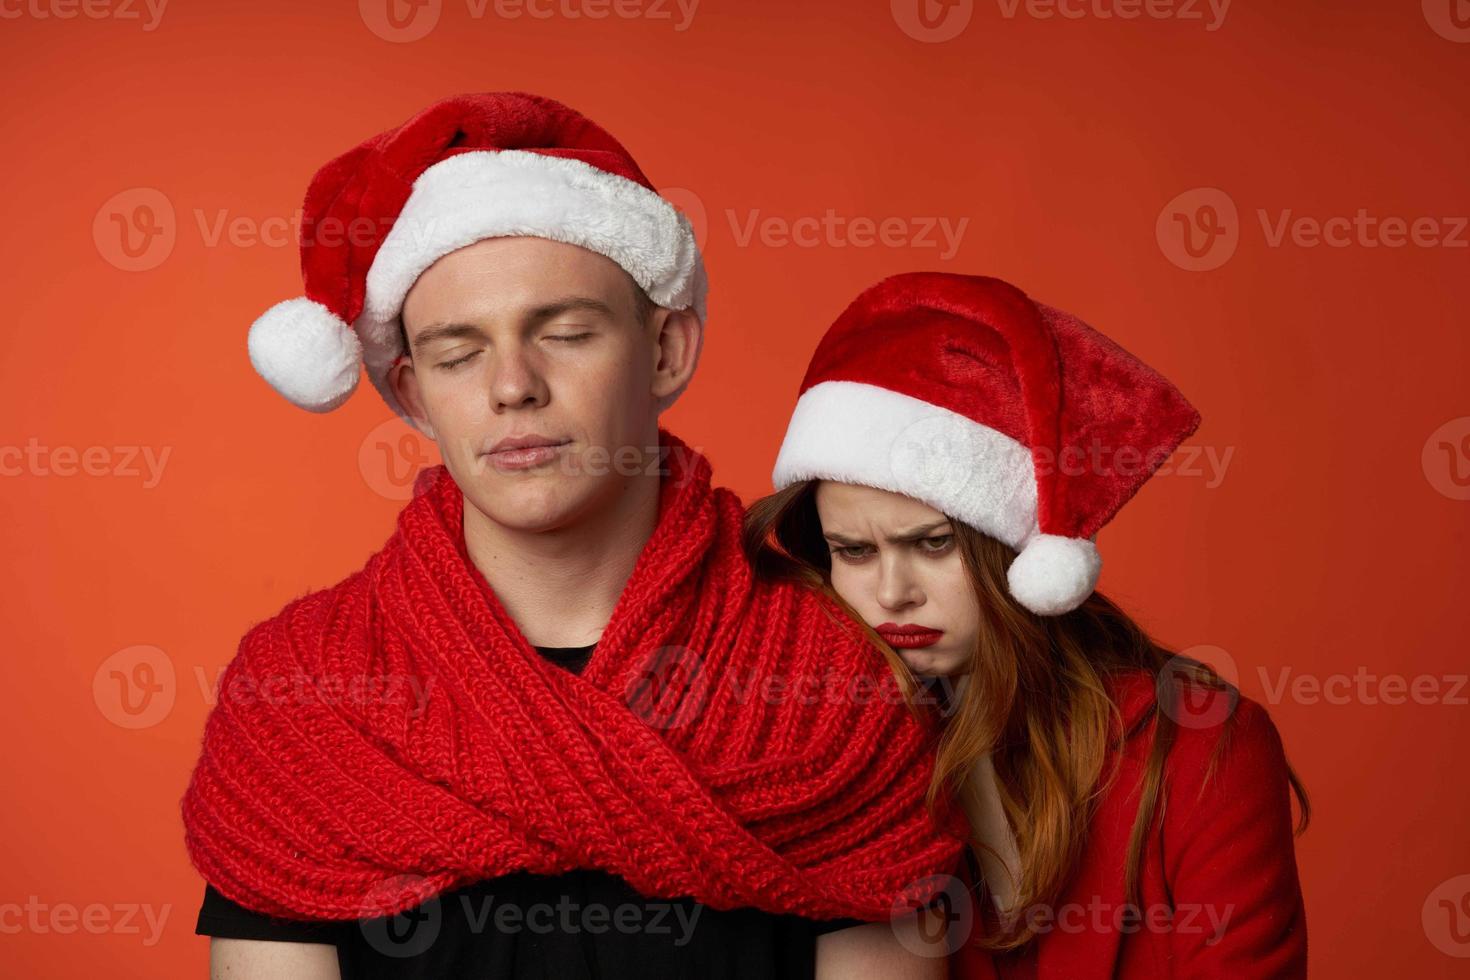 young couple in New Year's clothes Christmas holiday isolated background photo